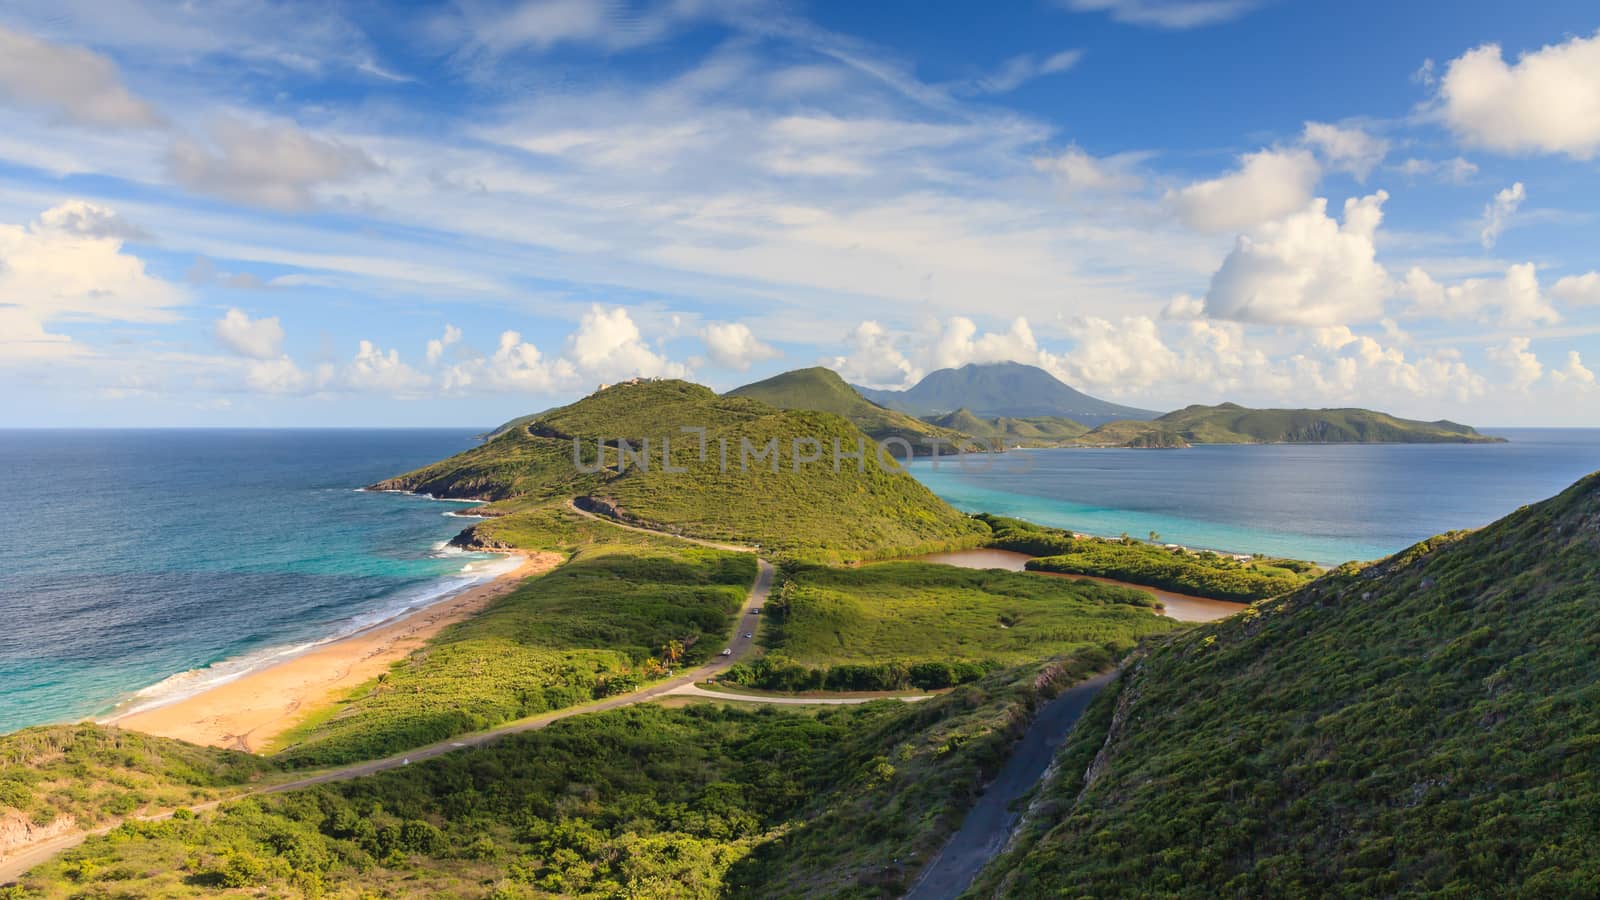 A panoramic view of the West Indian island of St Kitts.  To the left is the Atlantic Ocean, to the right is the Caribbean Ocean and in the background is the island of Nevis.